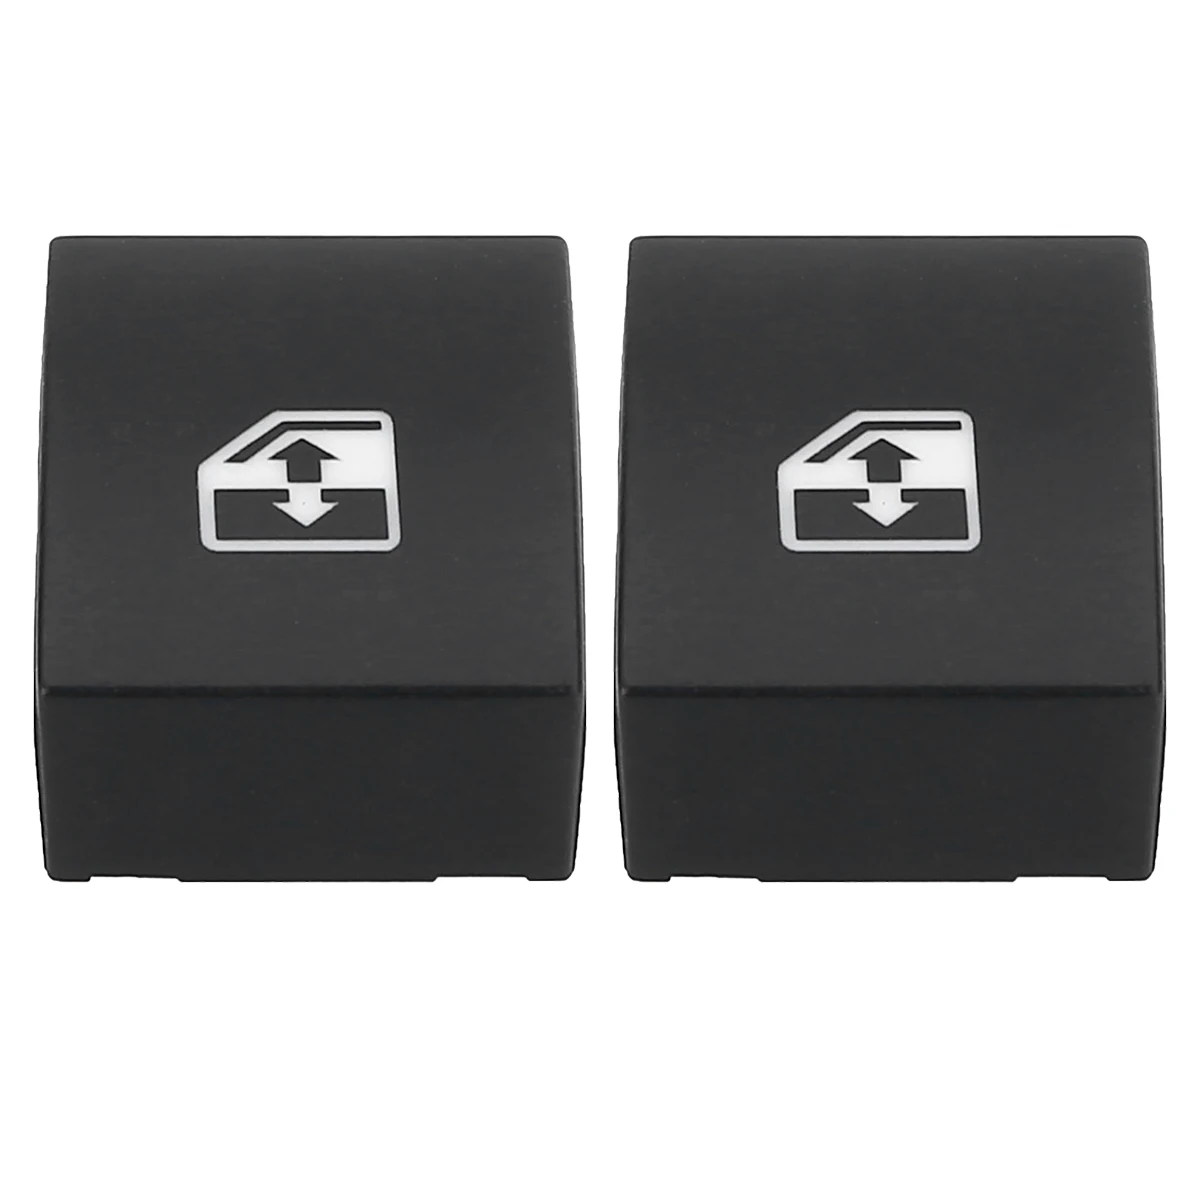 

2Pcs Electric Window Switch Button Cover 13228881 for VAUXHALL OPEL ASTRA MK5 H 04-10 ZAFIRA B 05-11/TIGRA B 04-09